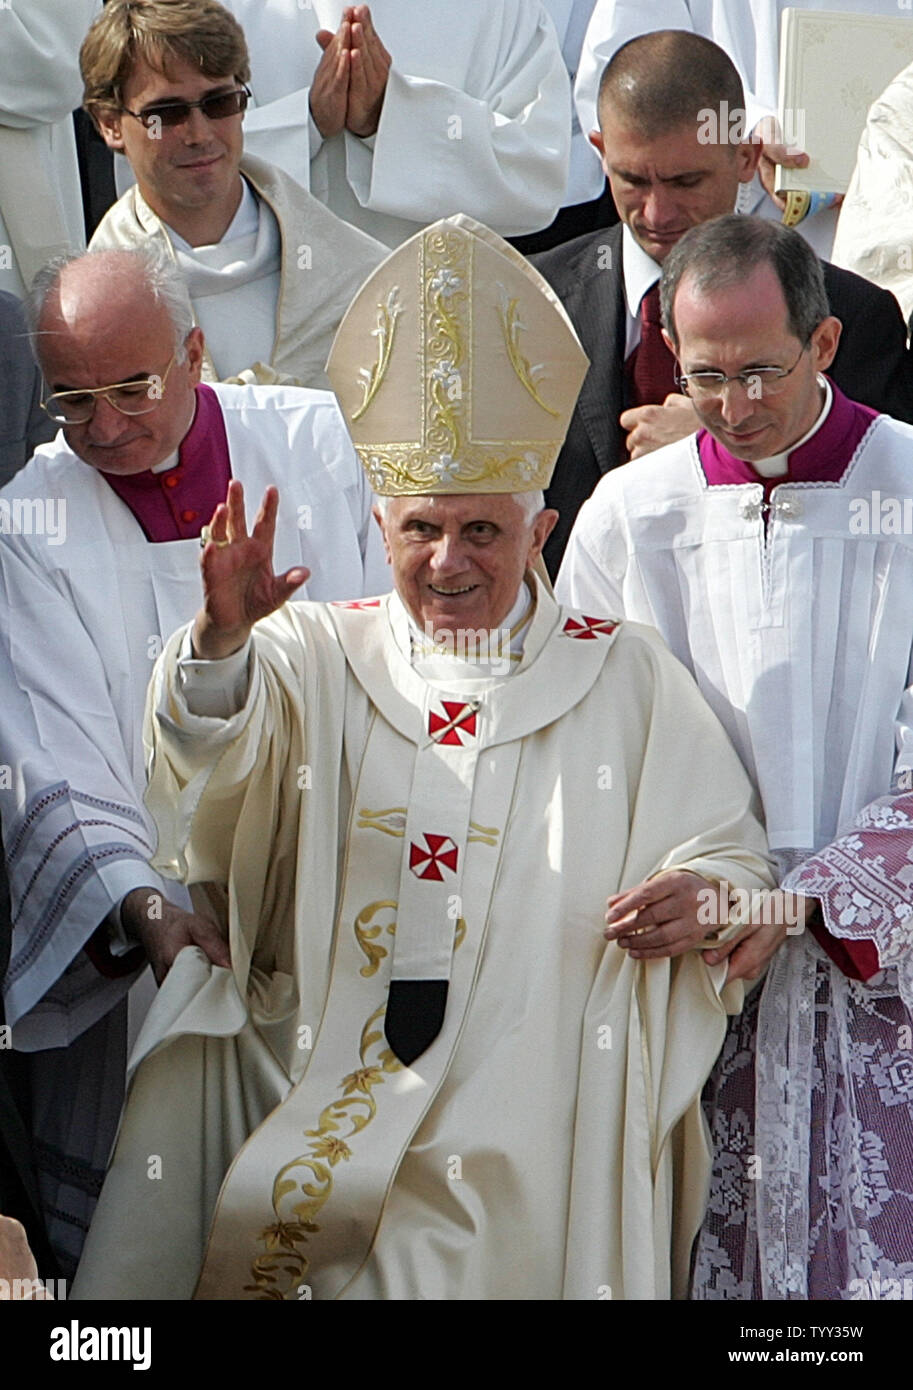 Pope Benedict XVI salutes worshippers as he leaves after celebrating mass in Paris September 13, 2008. The pope is scheduled to spend two days in Paris before travelling to the pilgrimage site of Lourdes.  (UPI Photo/Eco Clement) Stock Photo